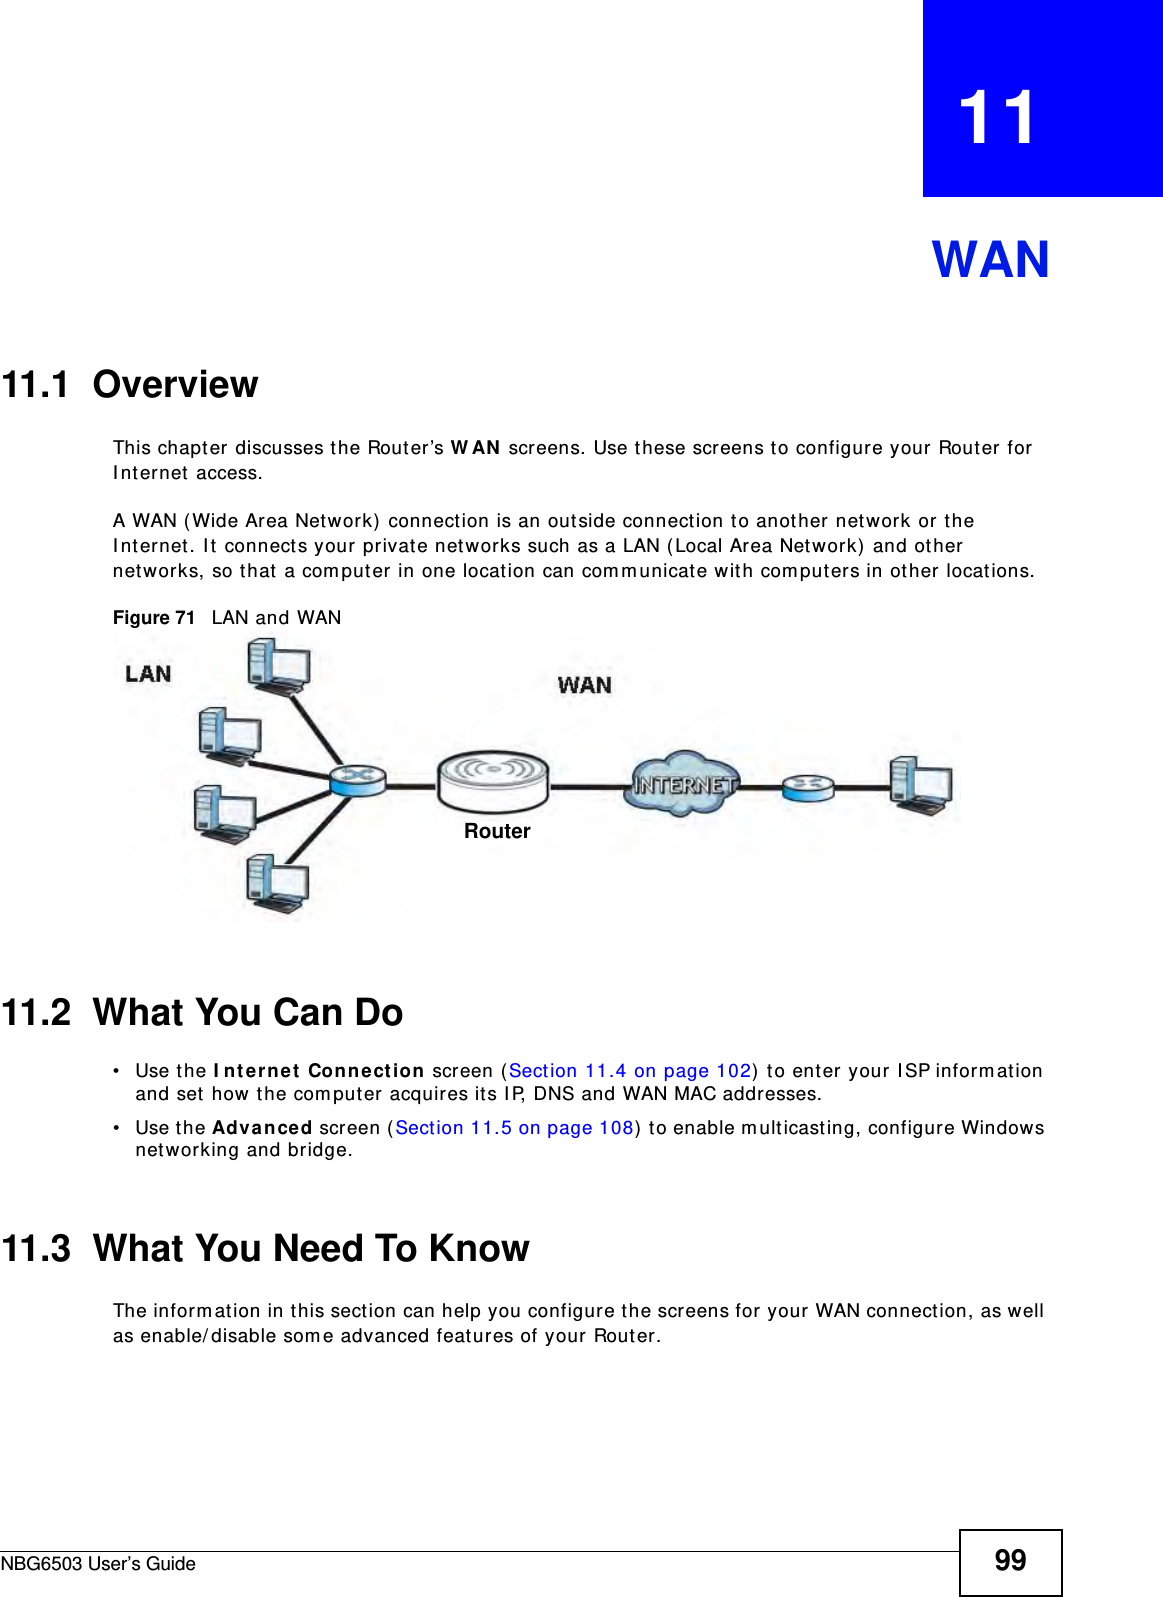 NBG6503 User’s Guide 99CHAPTER   11WAN11.1  OverviewThis chapter discusses the Router’s WAN screens. Use these screens to configure your Router for Internet access.A WAN (Wide Area Network) connection is an outside connection to another network or the Internet. It connects your private networks such as a LAN (Local Area Network) and other networks, so that a computer in one location can communicate with computers in other locations.Figure 71   LAN and WAN11.2  What You Can Do•Use the Internet Connection screen (Section 11.4 on page 102) to enter your ISP information and set how the computer acquires its IP, DNS and WAN MAC addresses.•Use the Advanced screen (Section 11.5 on page 108) to enable multicasting, configure Windows networking and bridge.11.3  What You Need To KnowThe information in this section can help you configure the screens for your WAN connection, as well as enable/disable some advanced features of your Router.Router